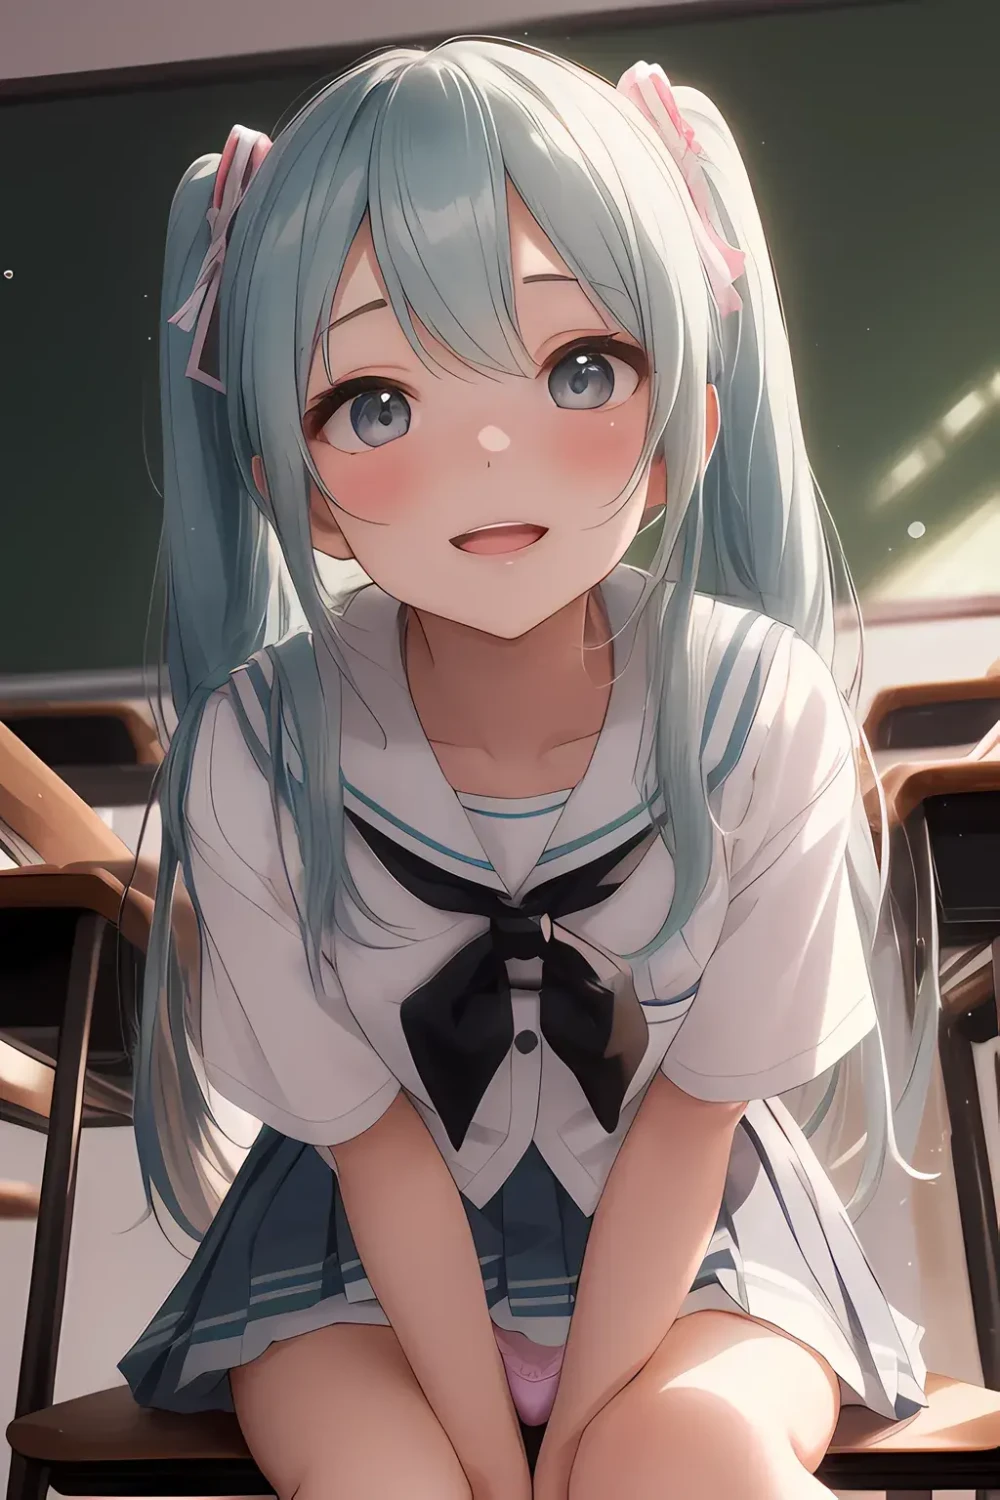 hatsune-miku-anime-style-all-ages-12